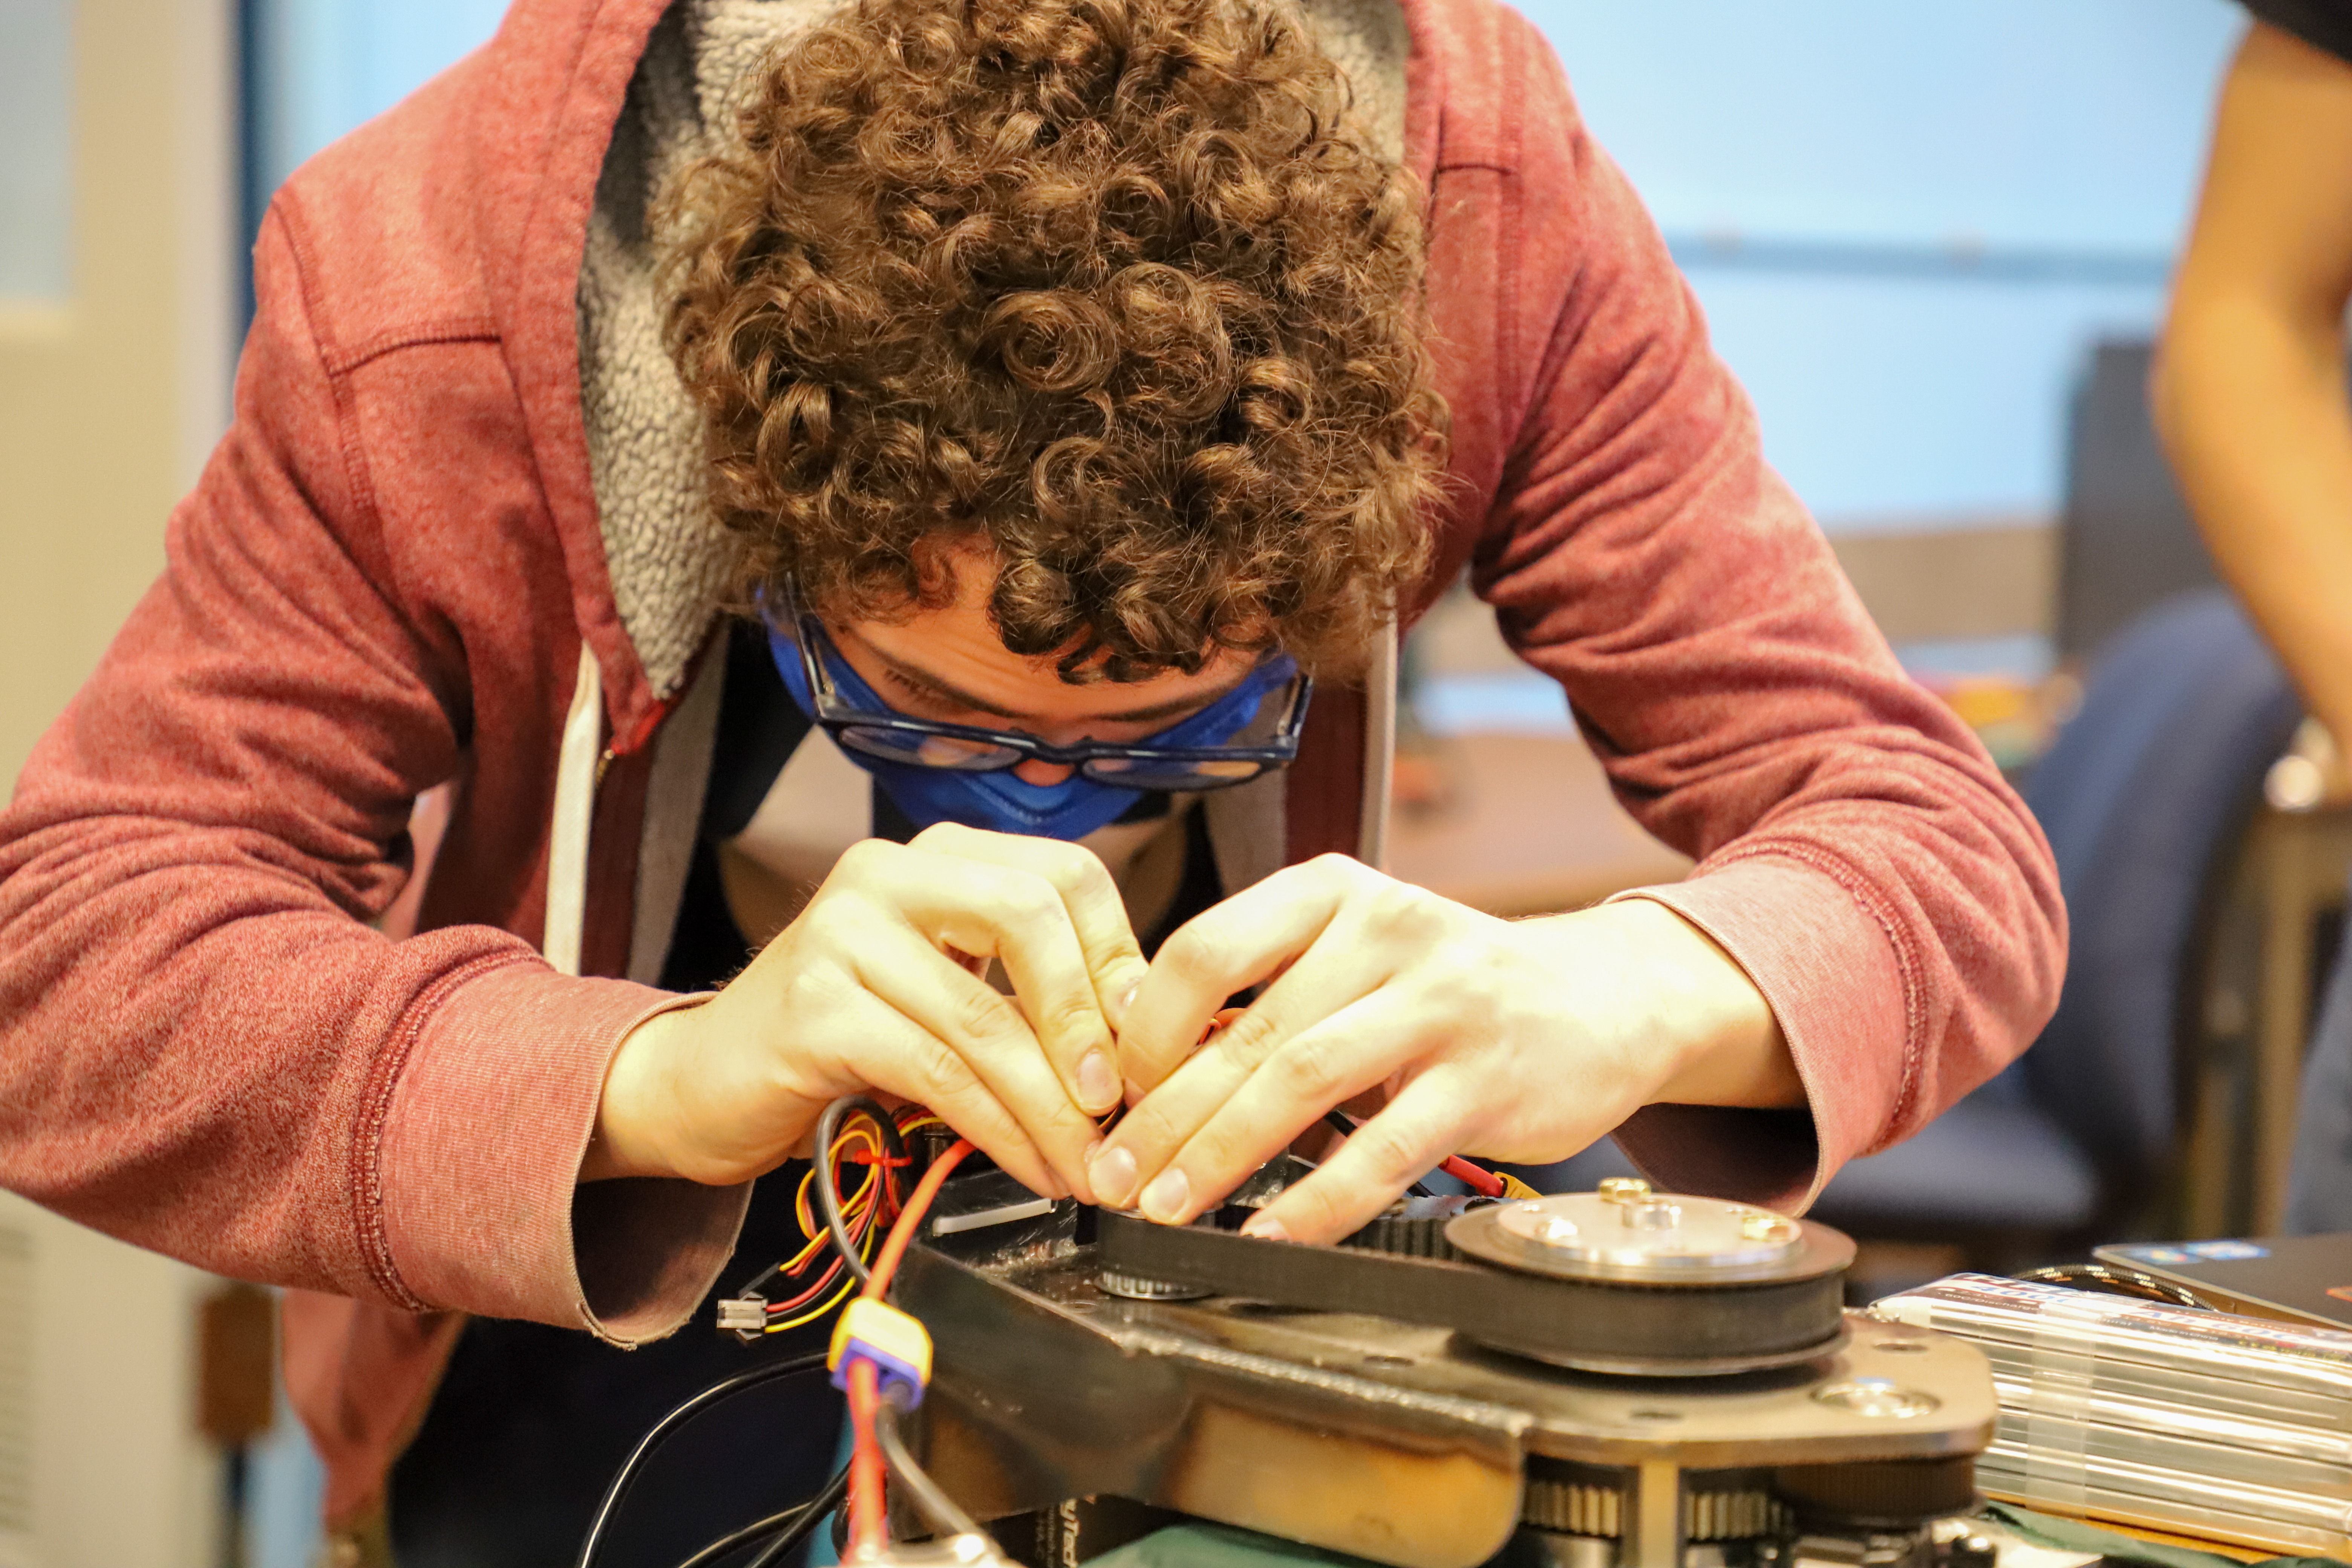 A ϲʷ¼ student works on the wiring of the robot's wheel.